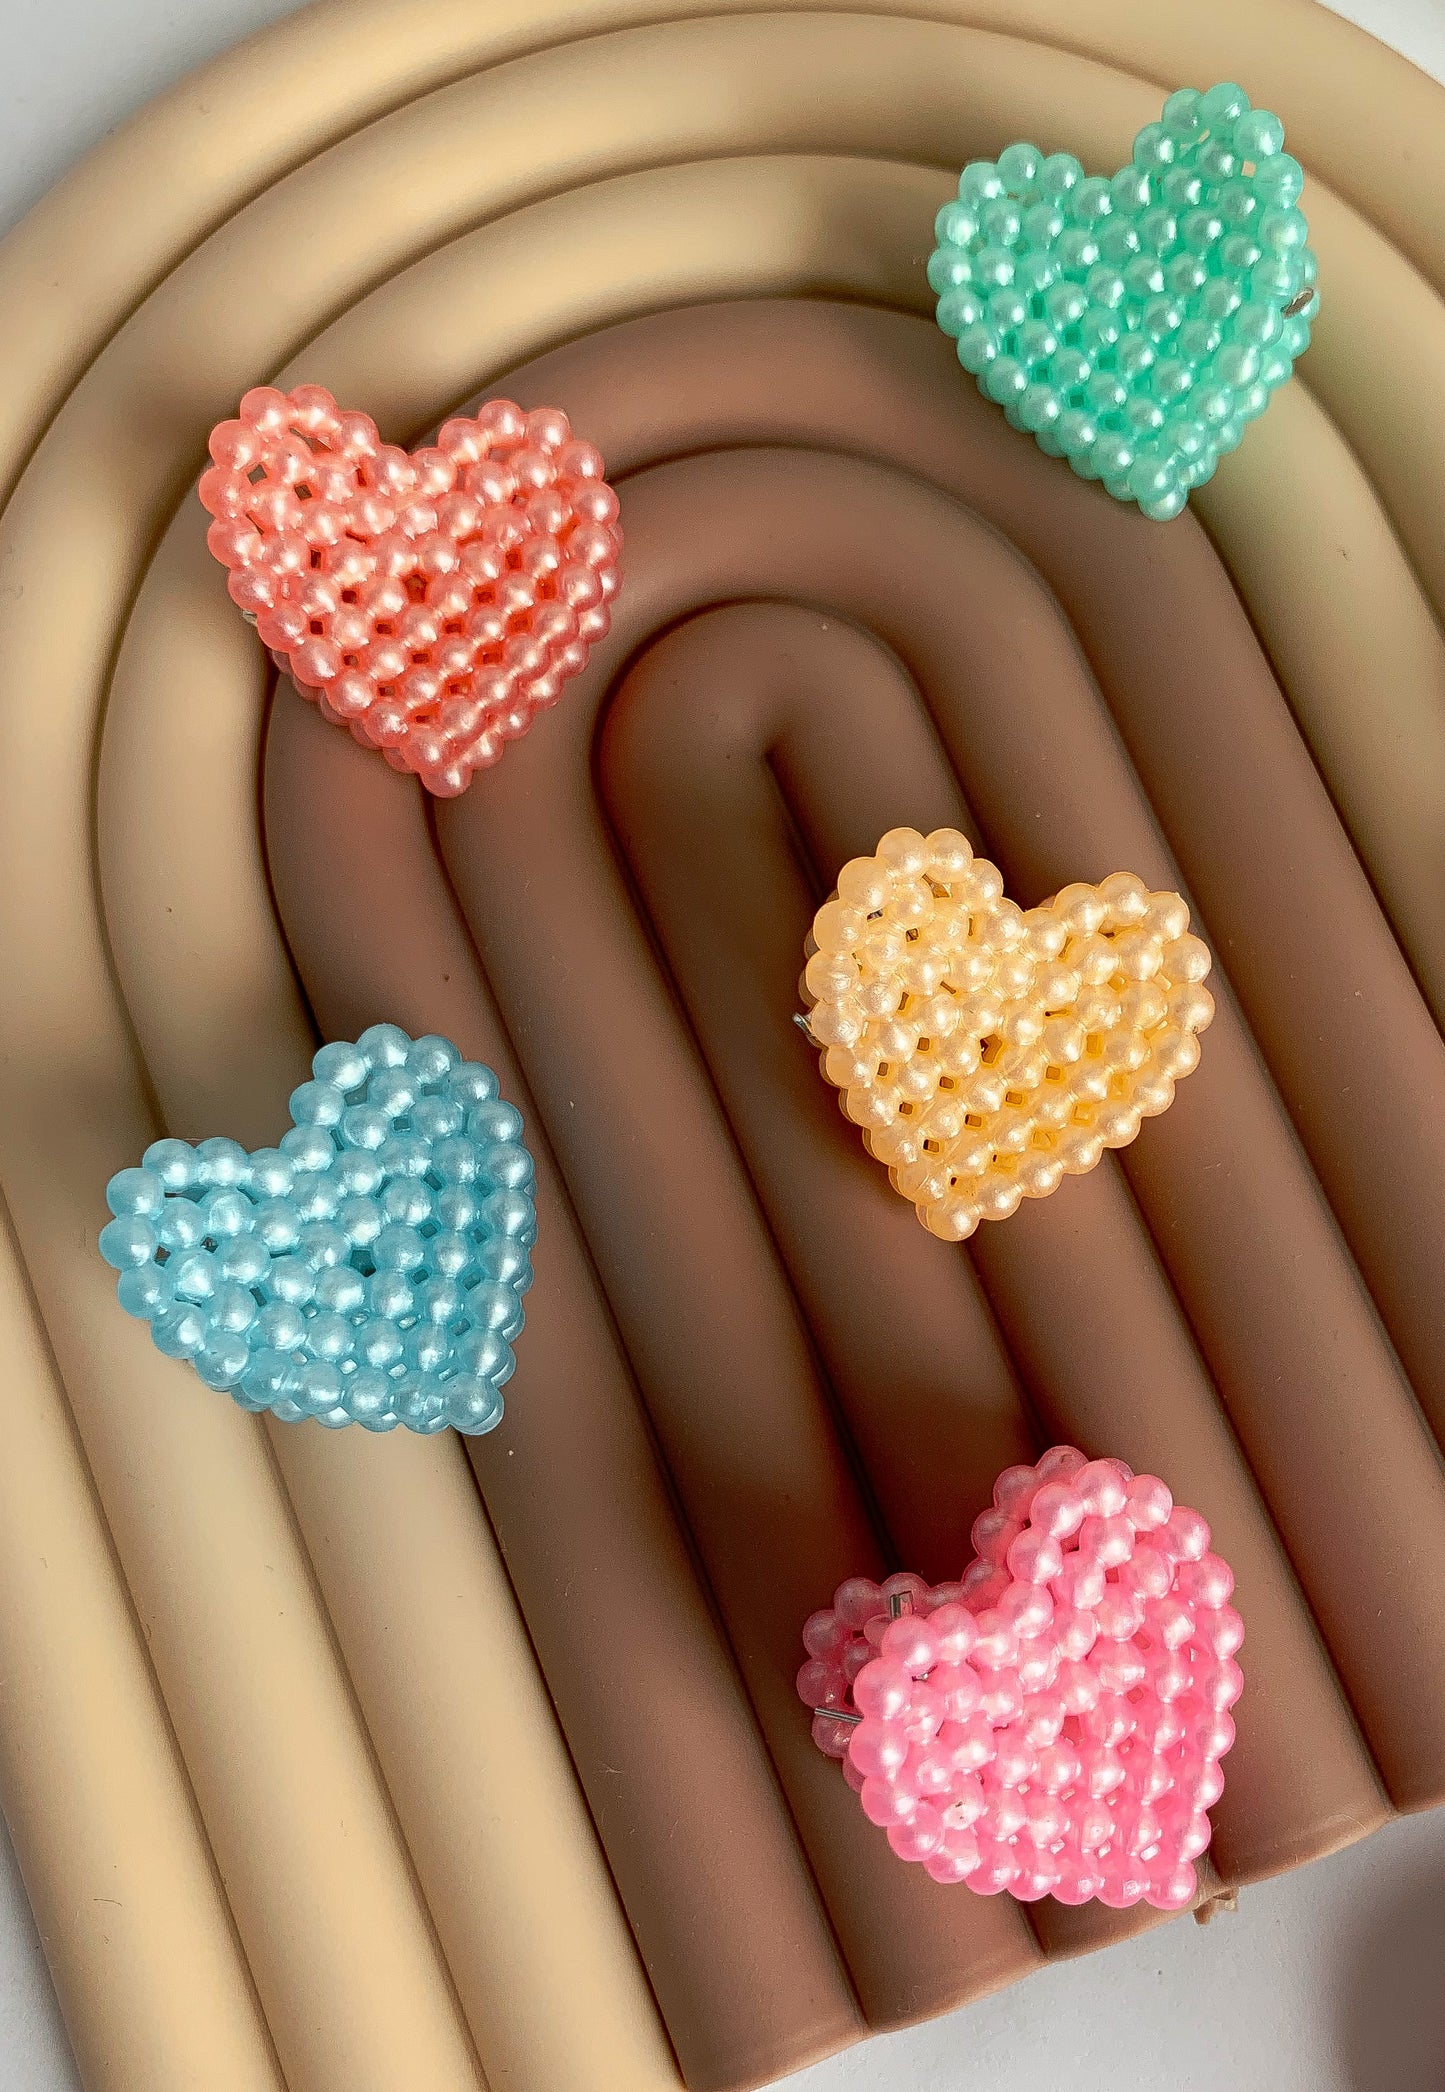 A pack of 6 small, romantic and tender heart claw clips. Each set comes with one of each color: blue, pink, purple, light orange, teal, and rose.